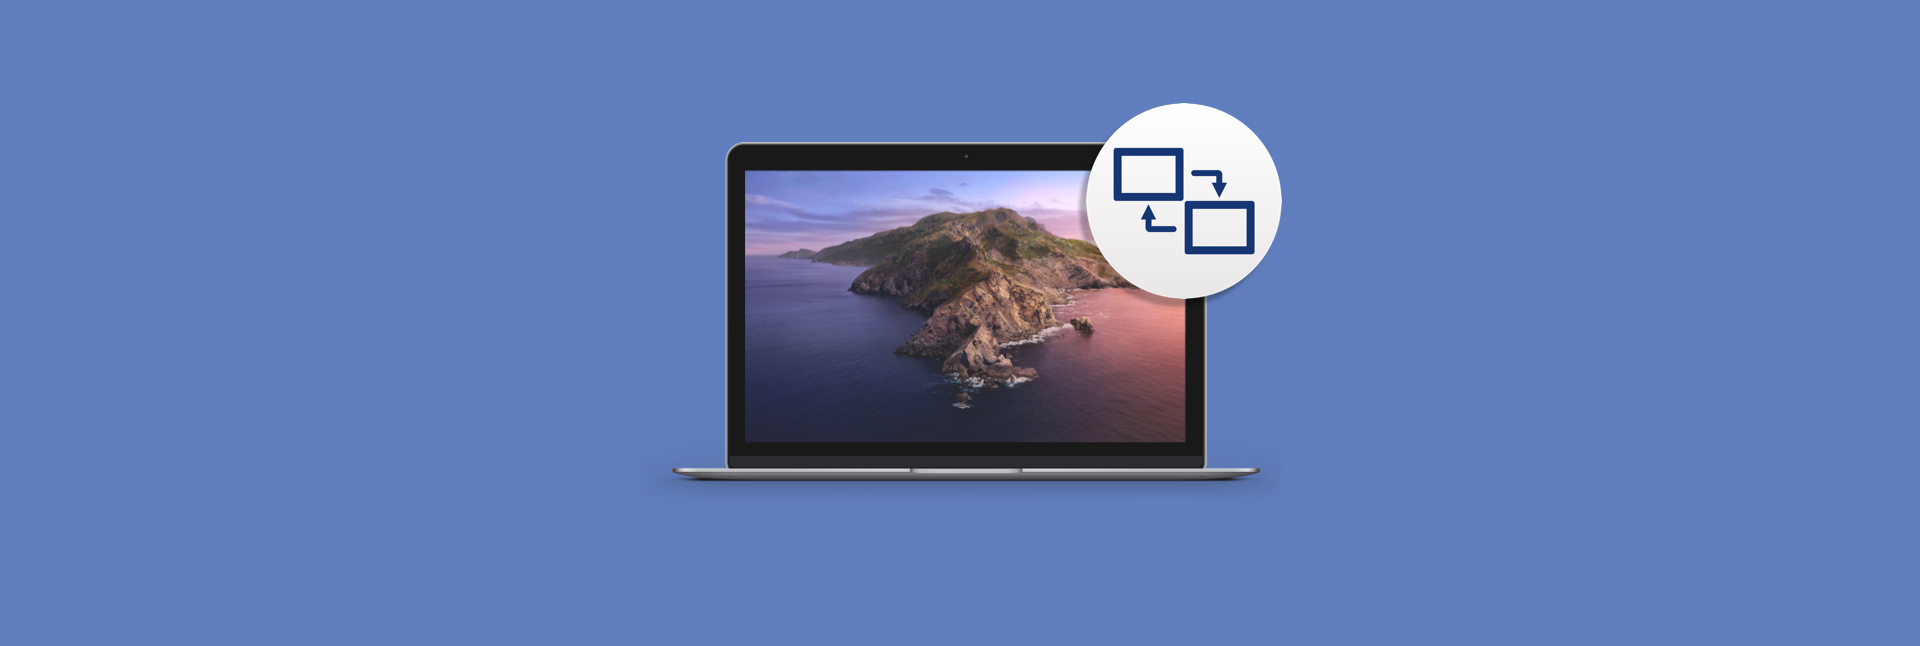 how to share screen on zoom from mac